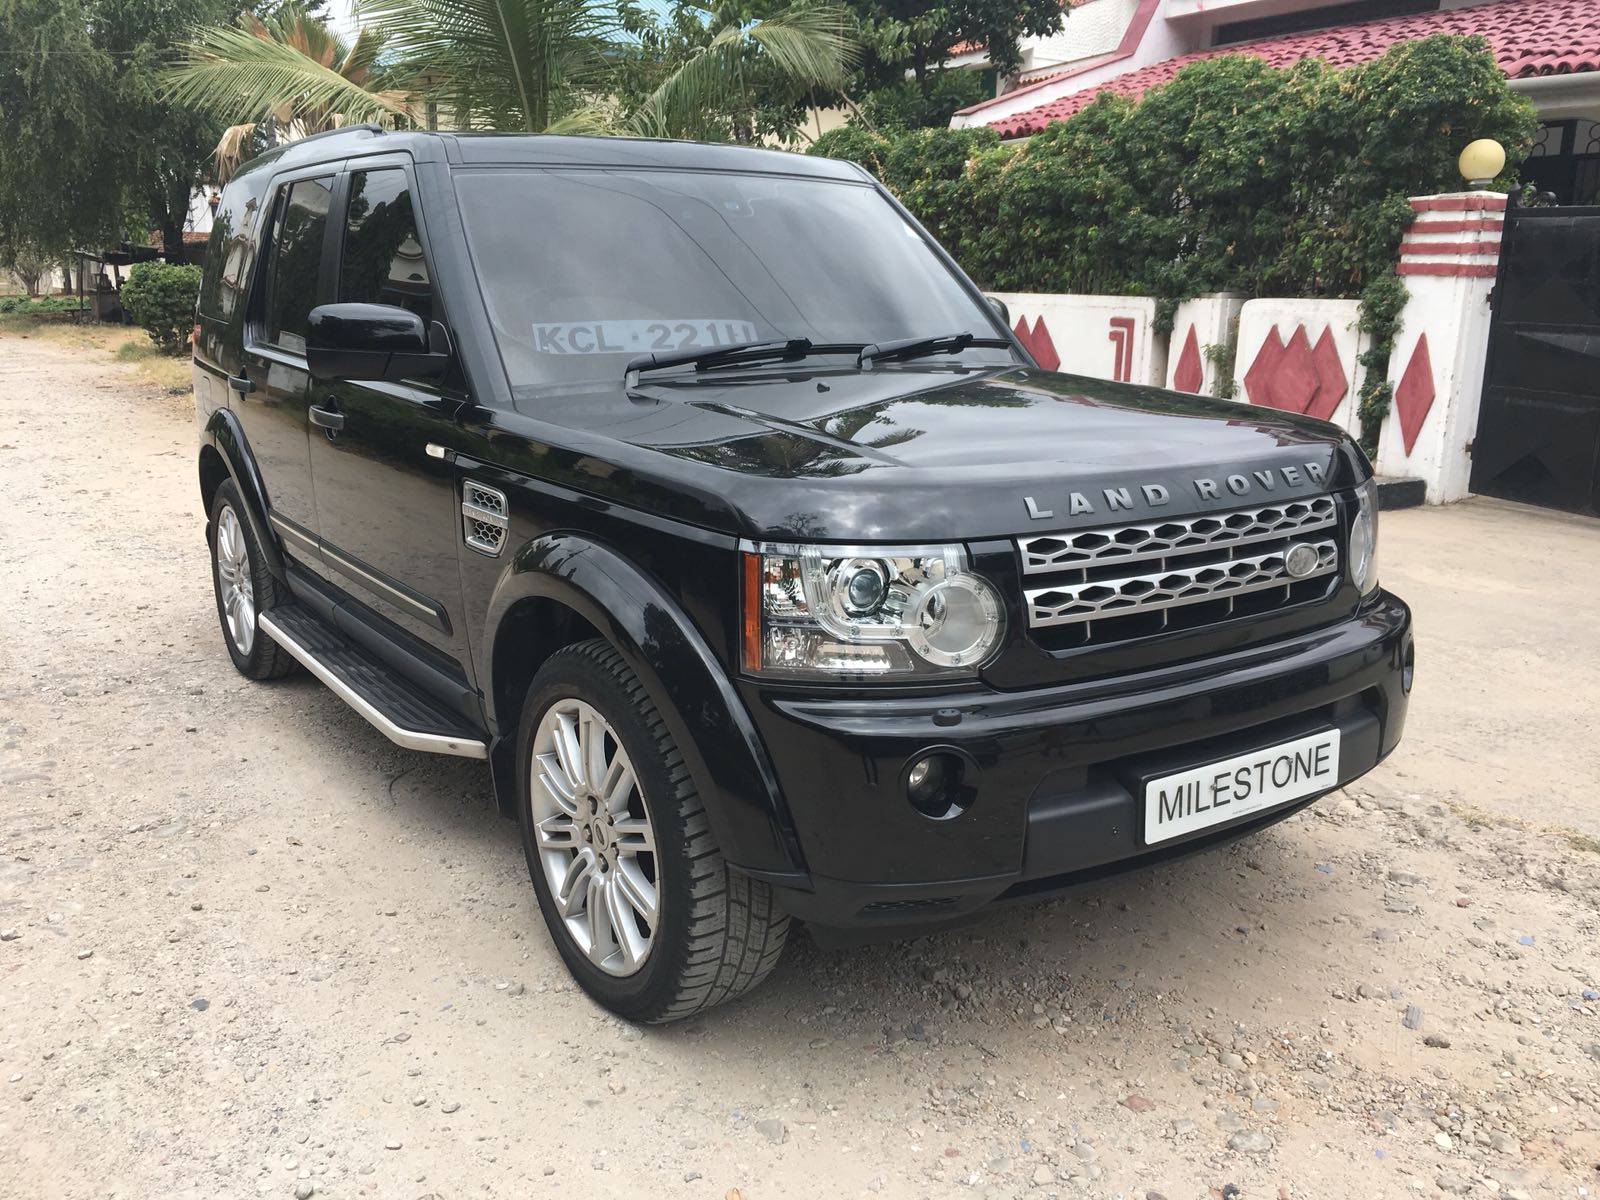 2010 Land Rover Discovery 4 HSE Diesel 3.0 Auto